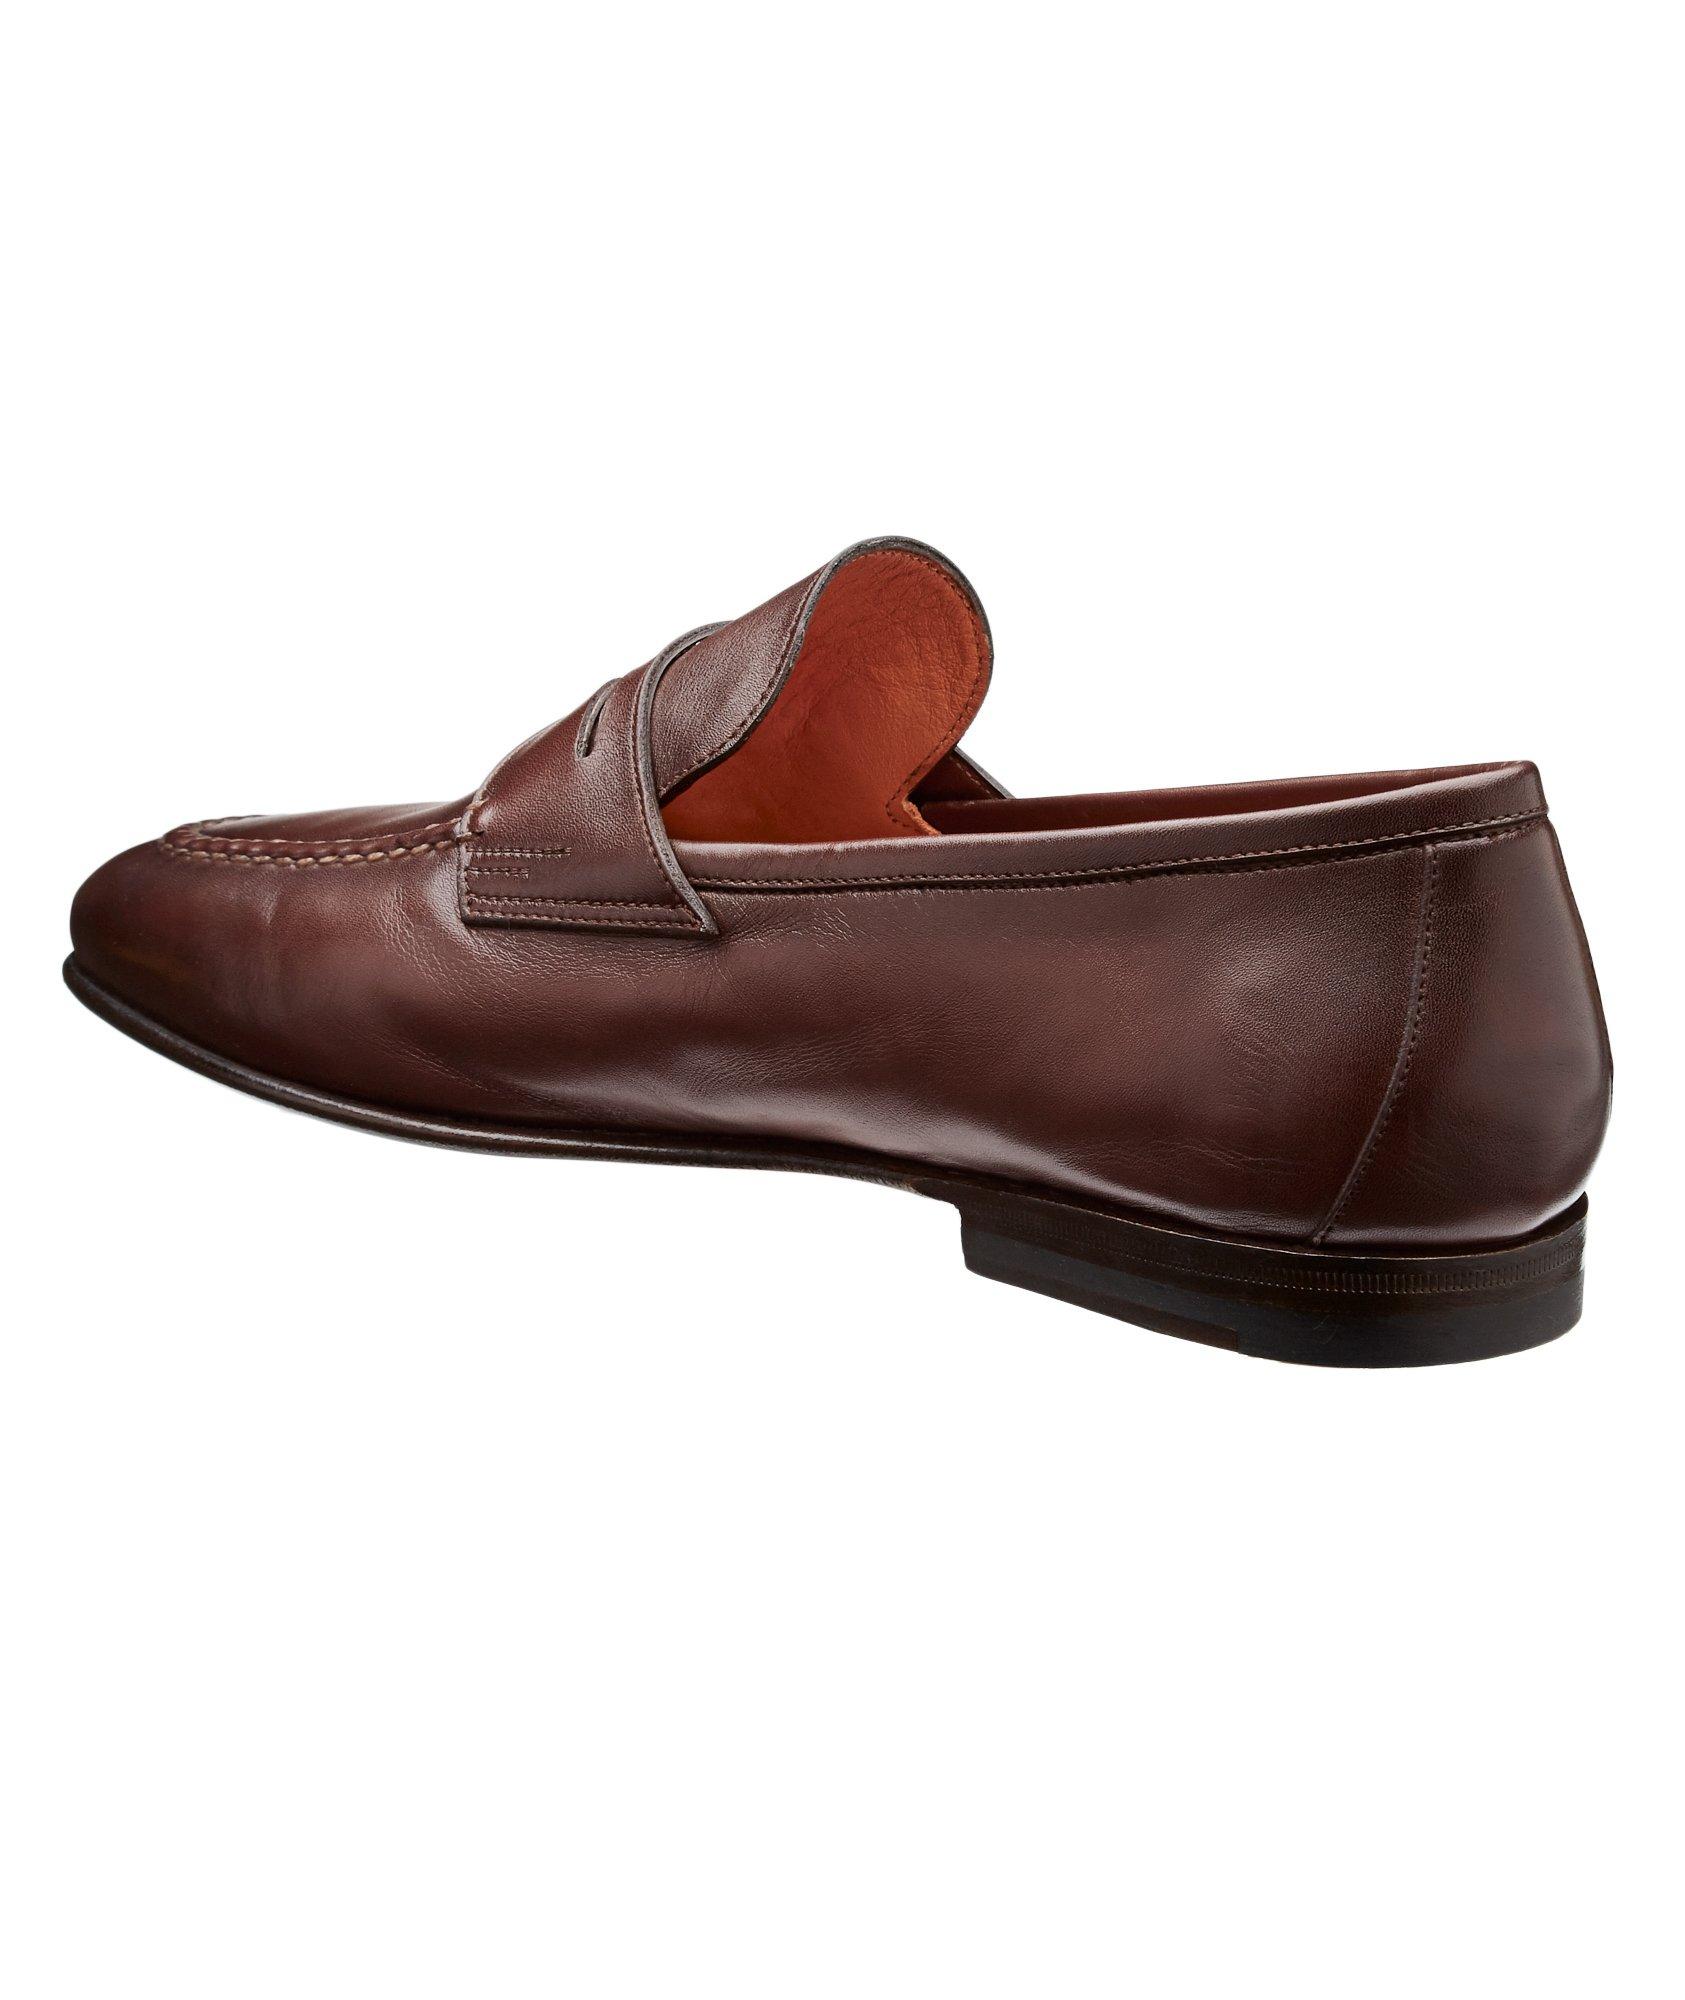  Leather Penny Loafers image 1